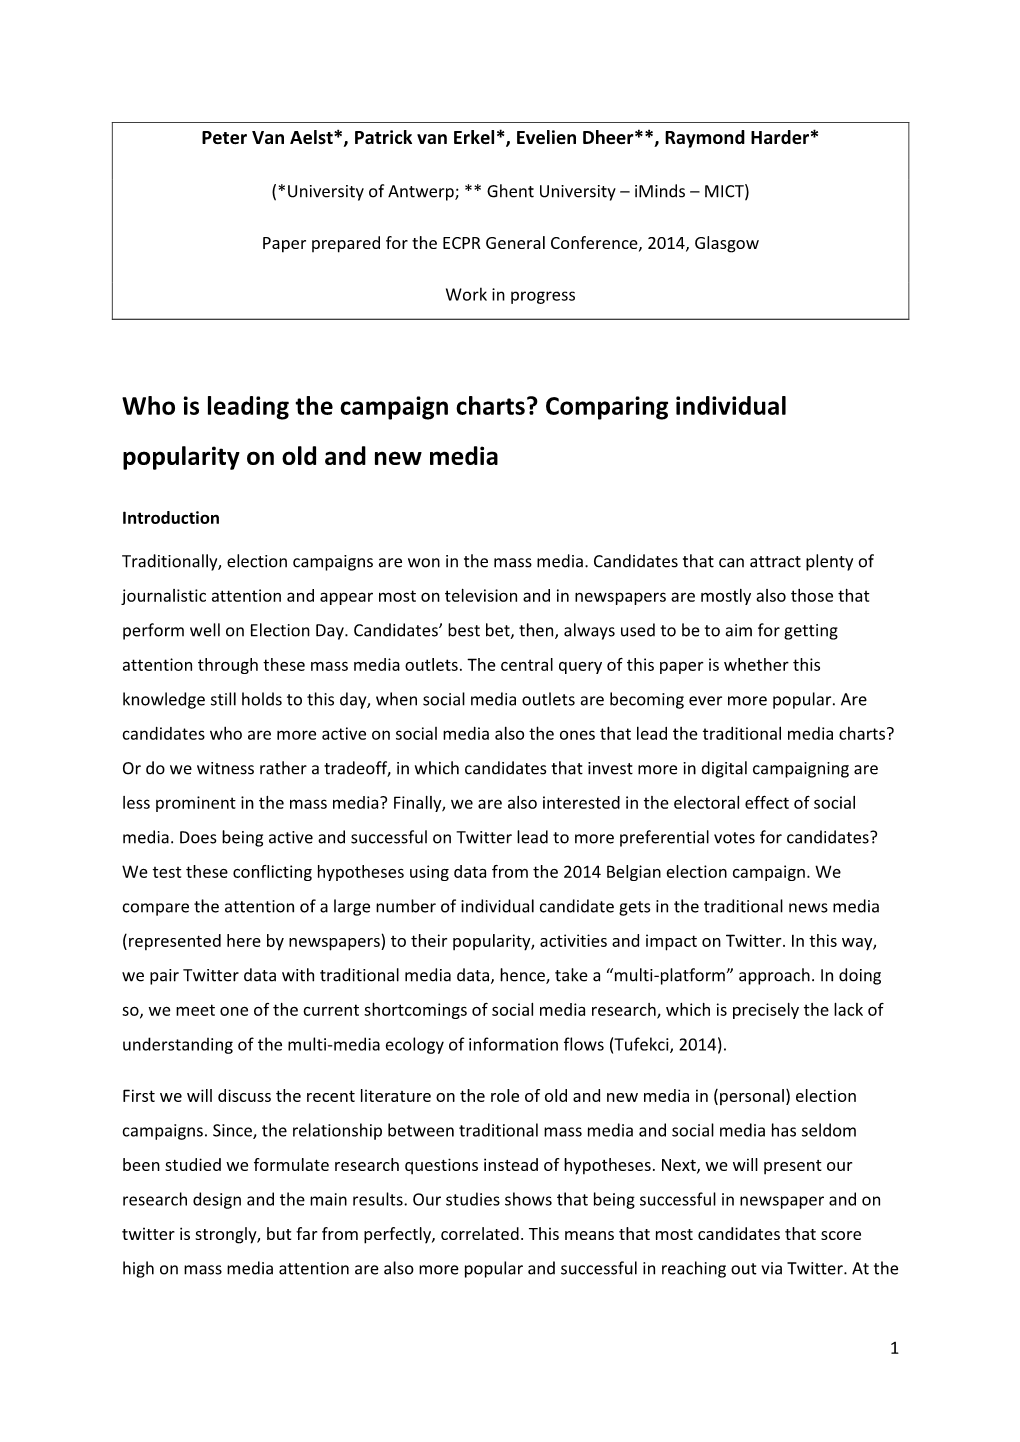 Who Is Leading the Campaign Charts? Comparing Individual Popularity on Old and New Media